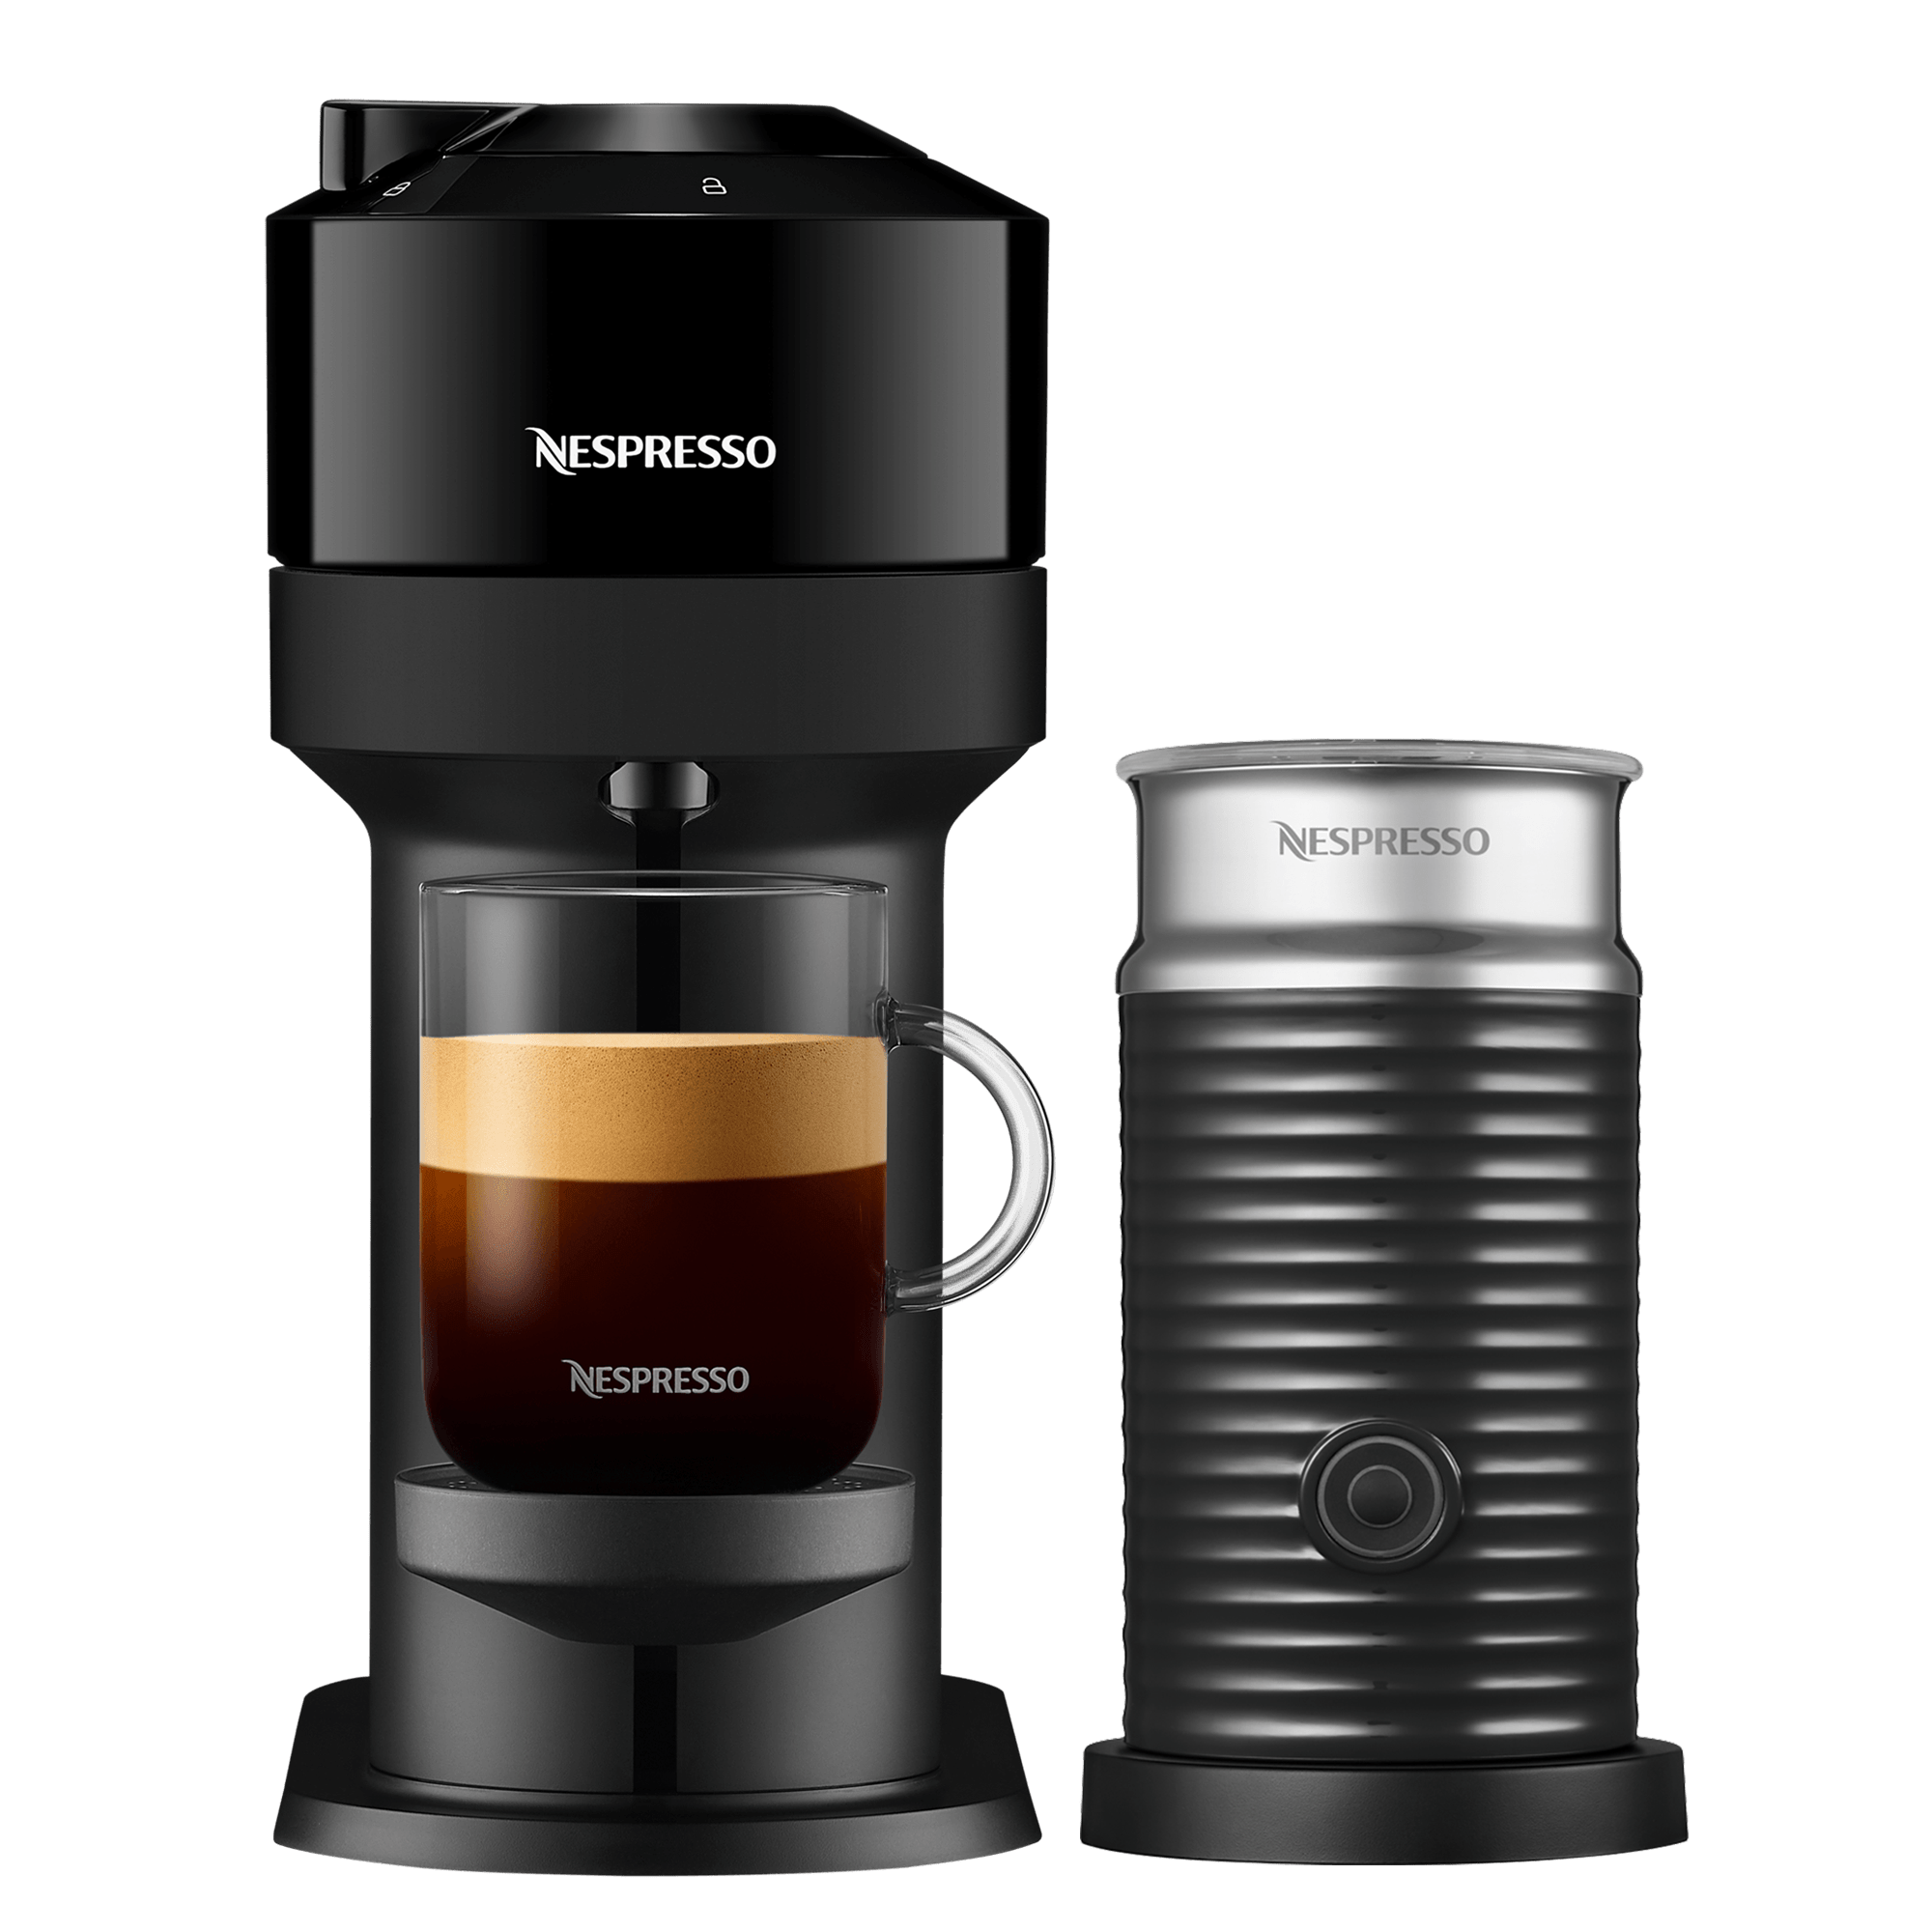 https://www.nespresso.com/shared_res/mos/free_html/sg/2023vertuopop/2023vertuopop-next-bundle-black-min.png